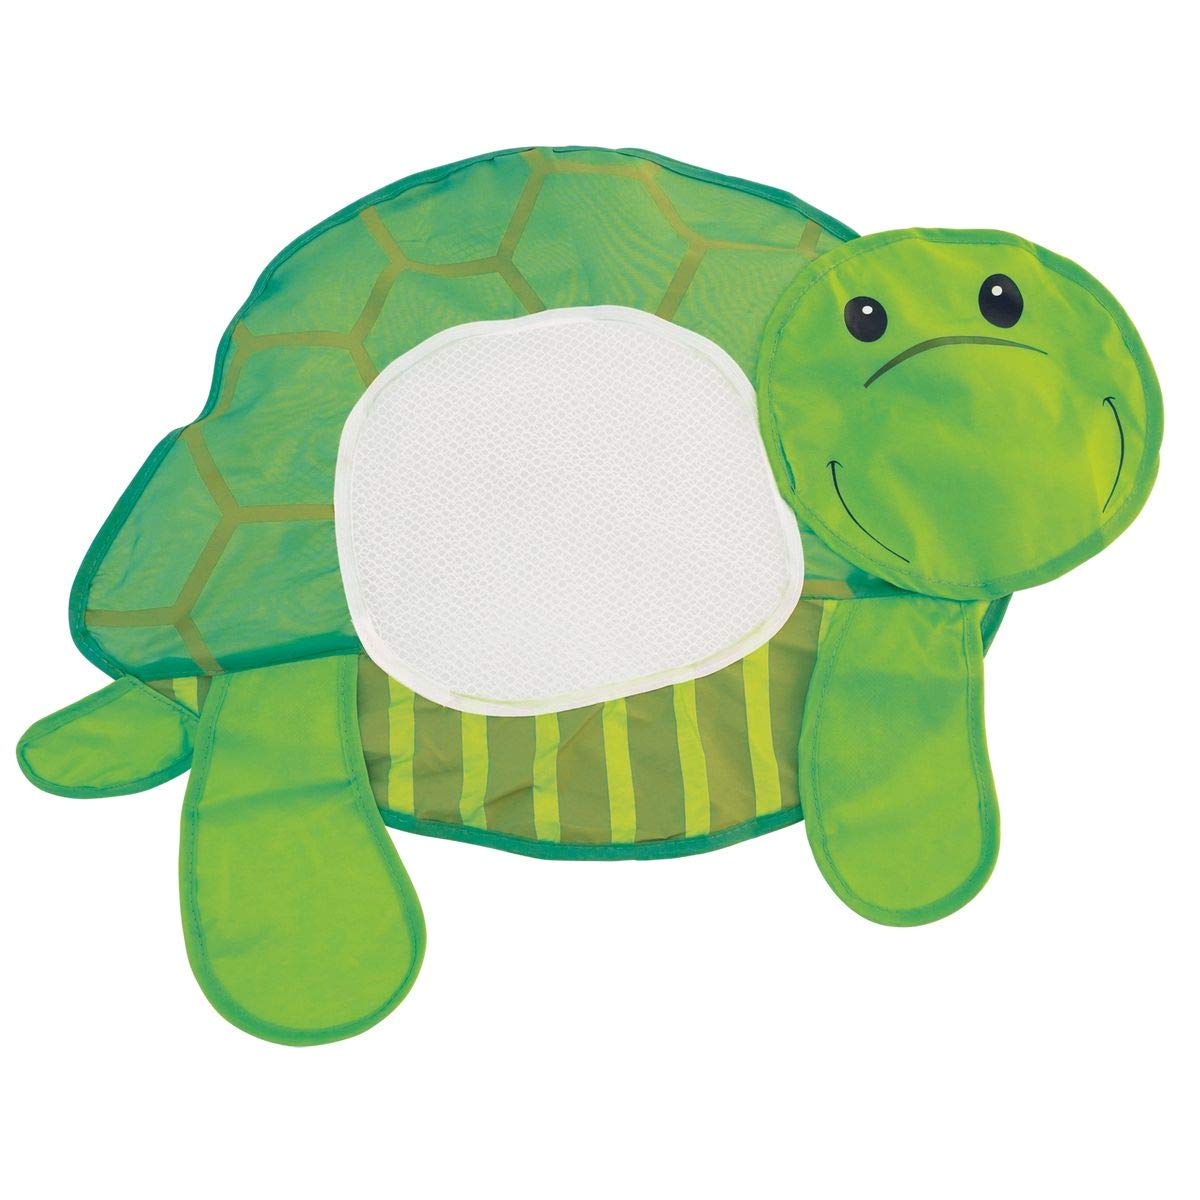 Bieco 04004529 Turtle Bath Net, Toy Storage for Bath, Storage for Bath Toys, Net for Bath Toys with Suction Cup for Attachment, Green